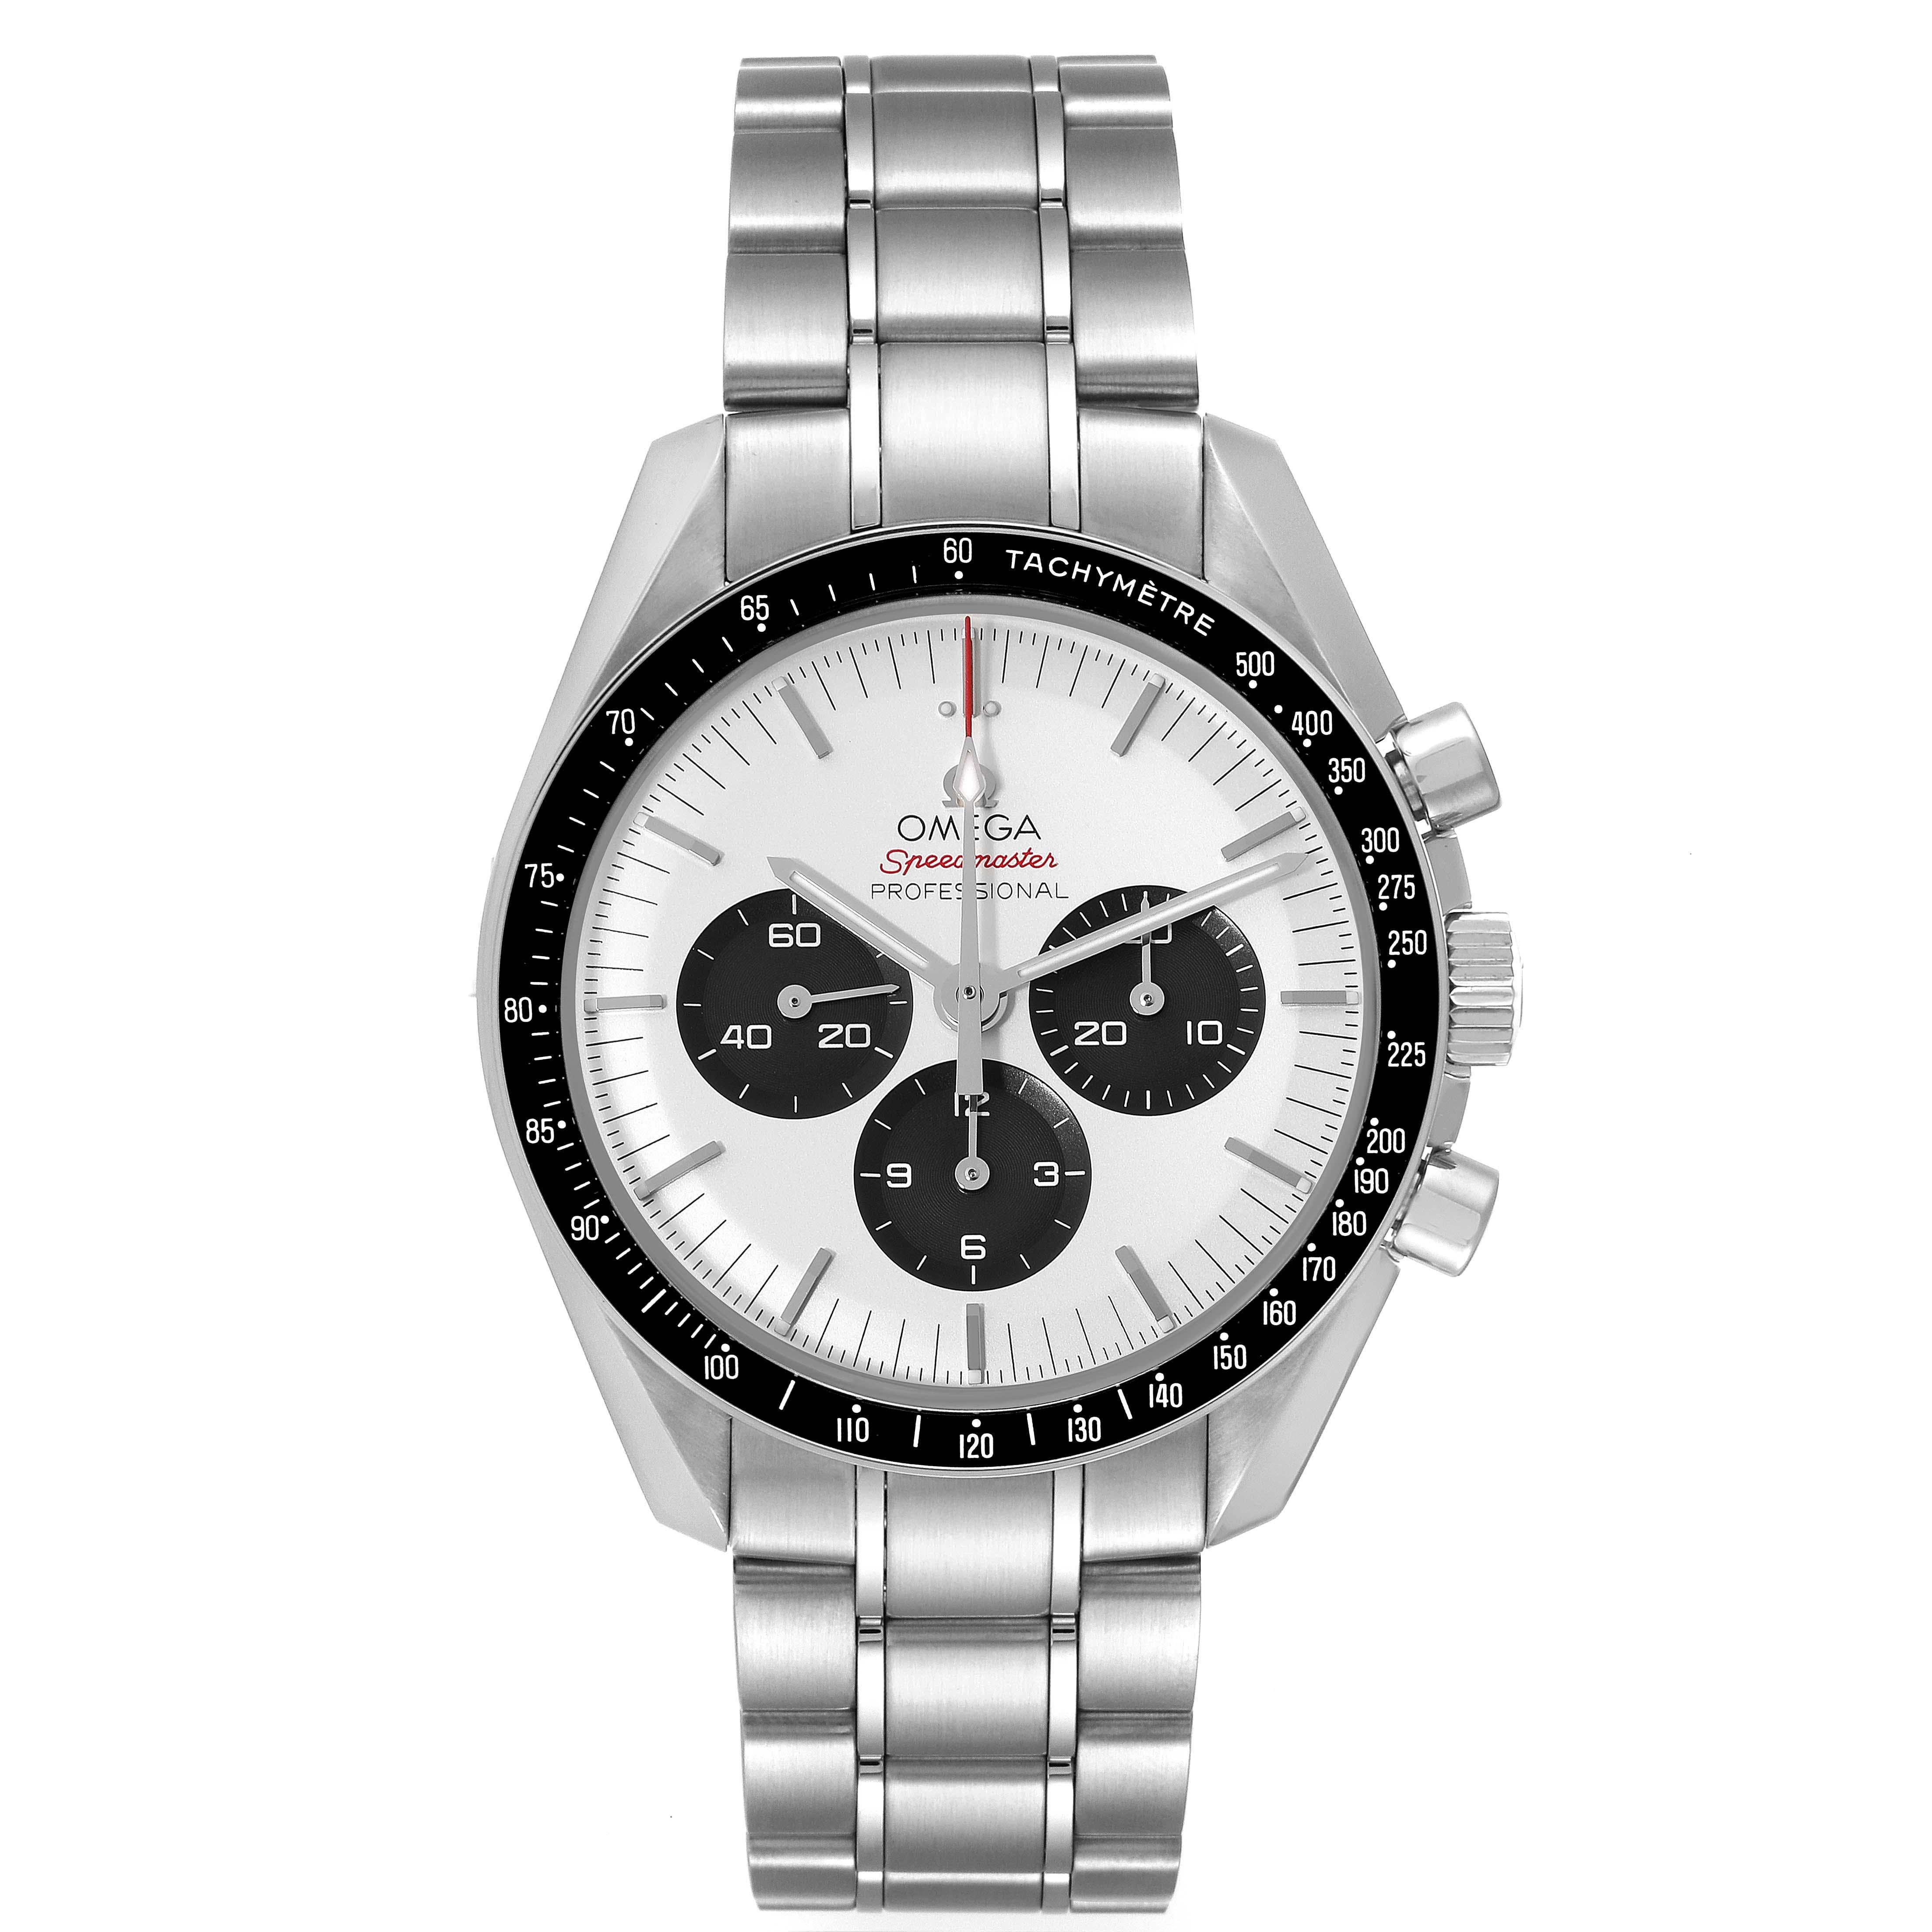 Omega Speedmaster Tokyo 2020 Olympics LE Mens Watch 522.30.42.30.04.001 Box Card. Manual winding chronograph movement. Stainless steel round case 42.0 mm in diameter. Stainless steel bezel with black aluminium tachymeter insert. Scratch resistant